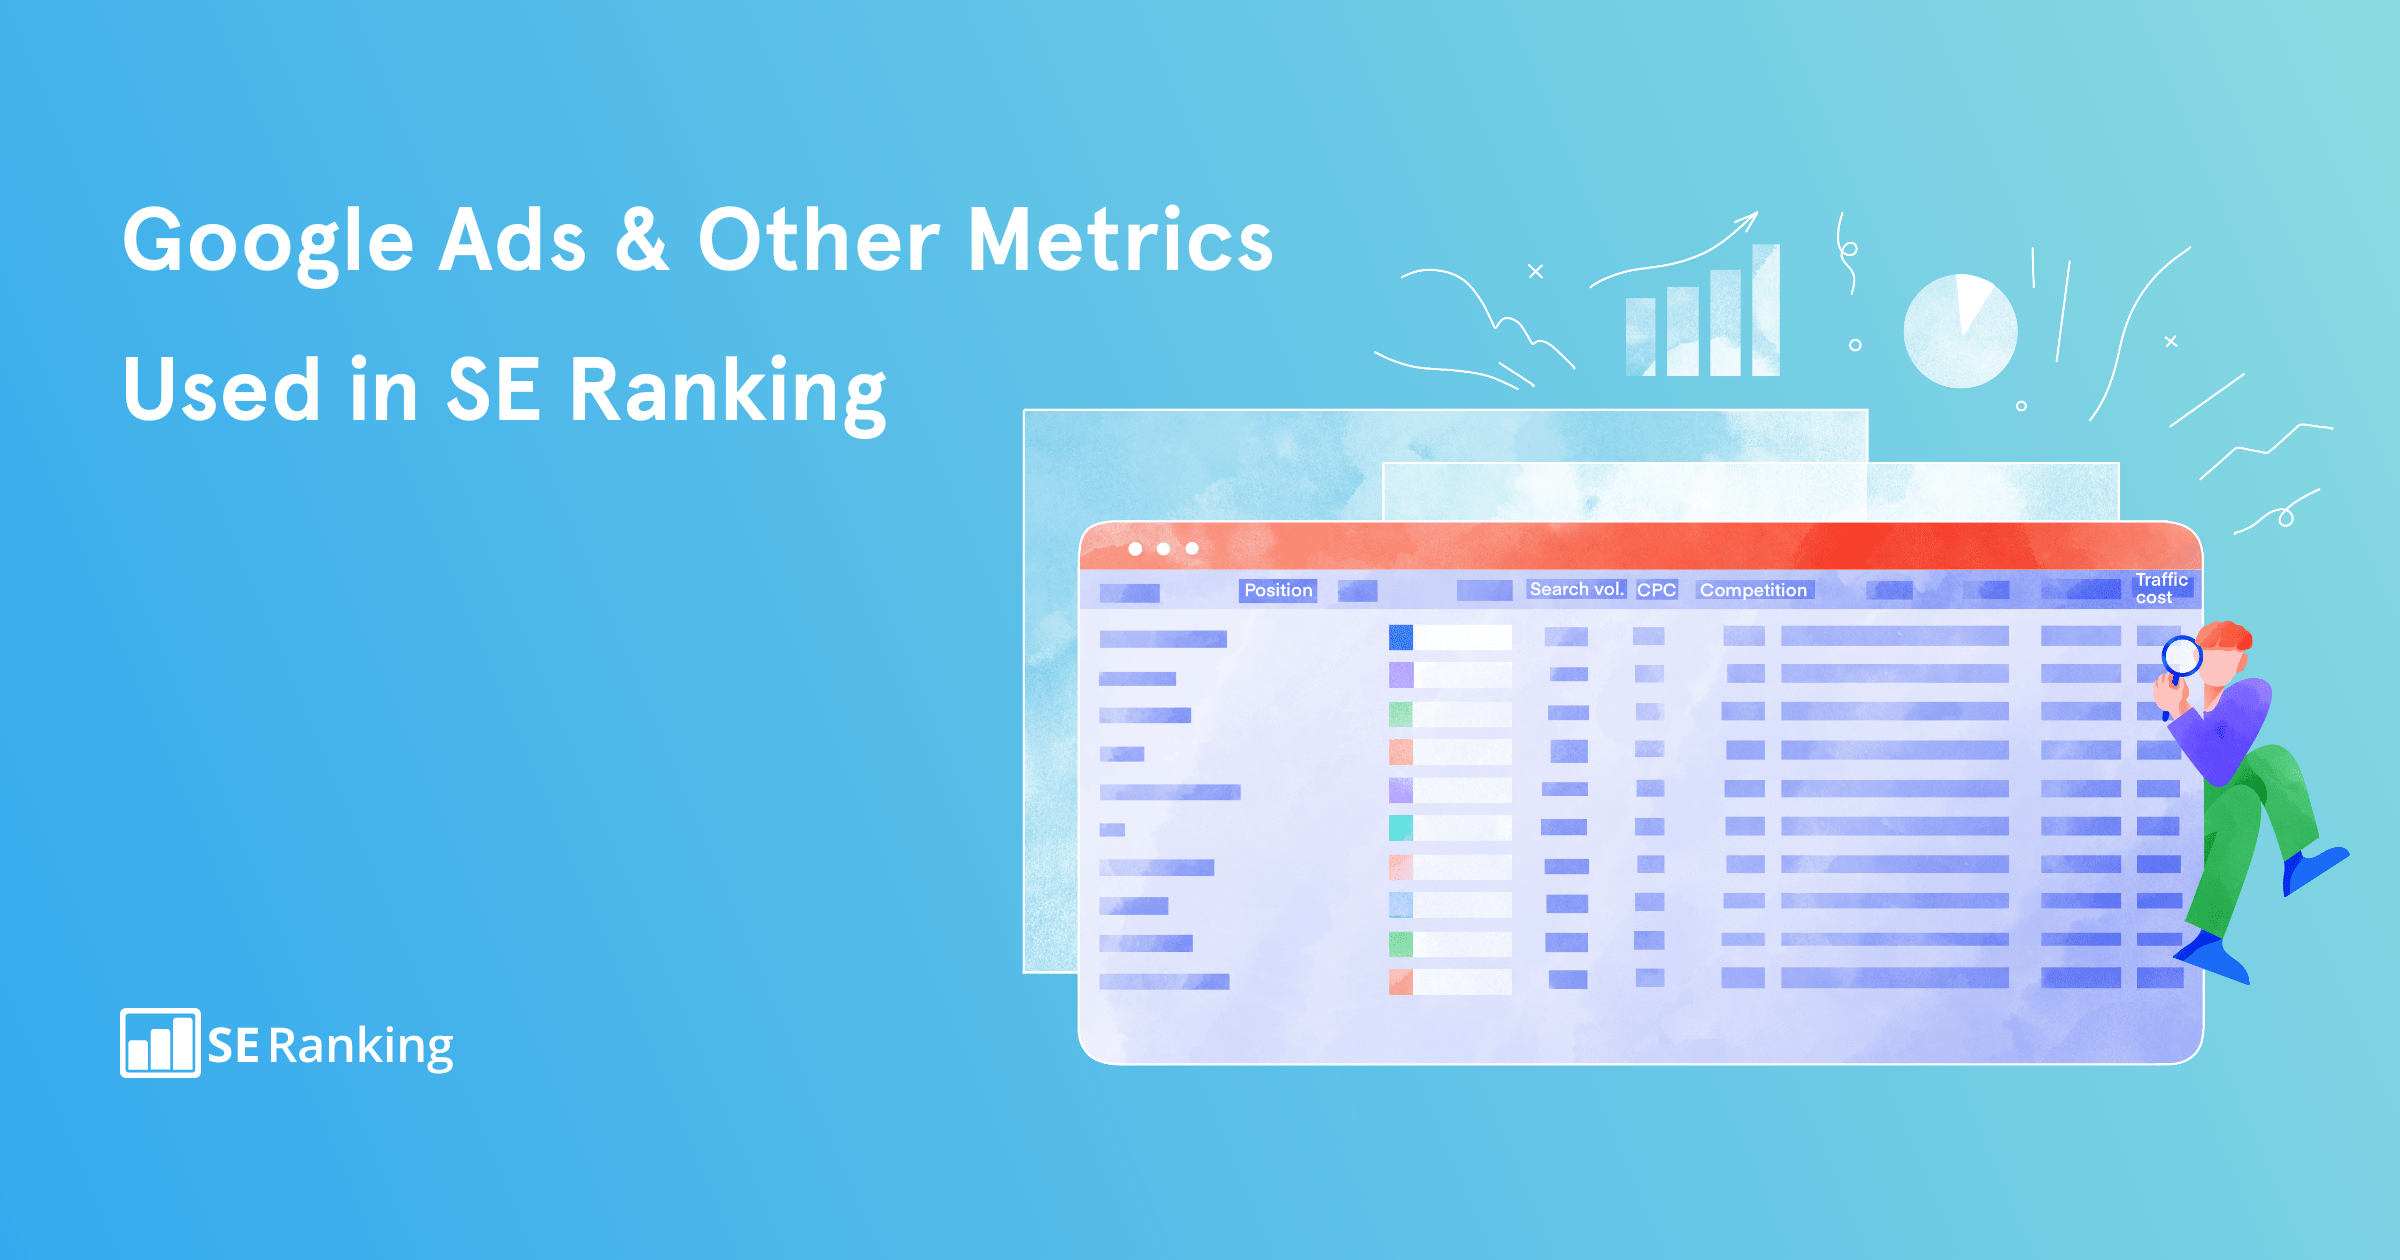 What Metrics Do We Use in SE Ranking?